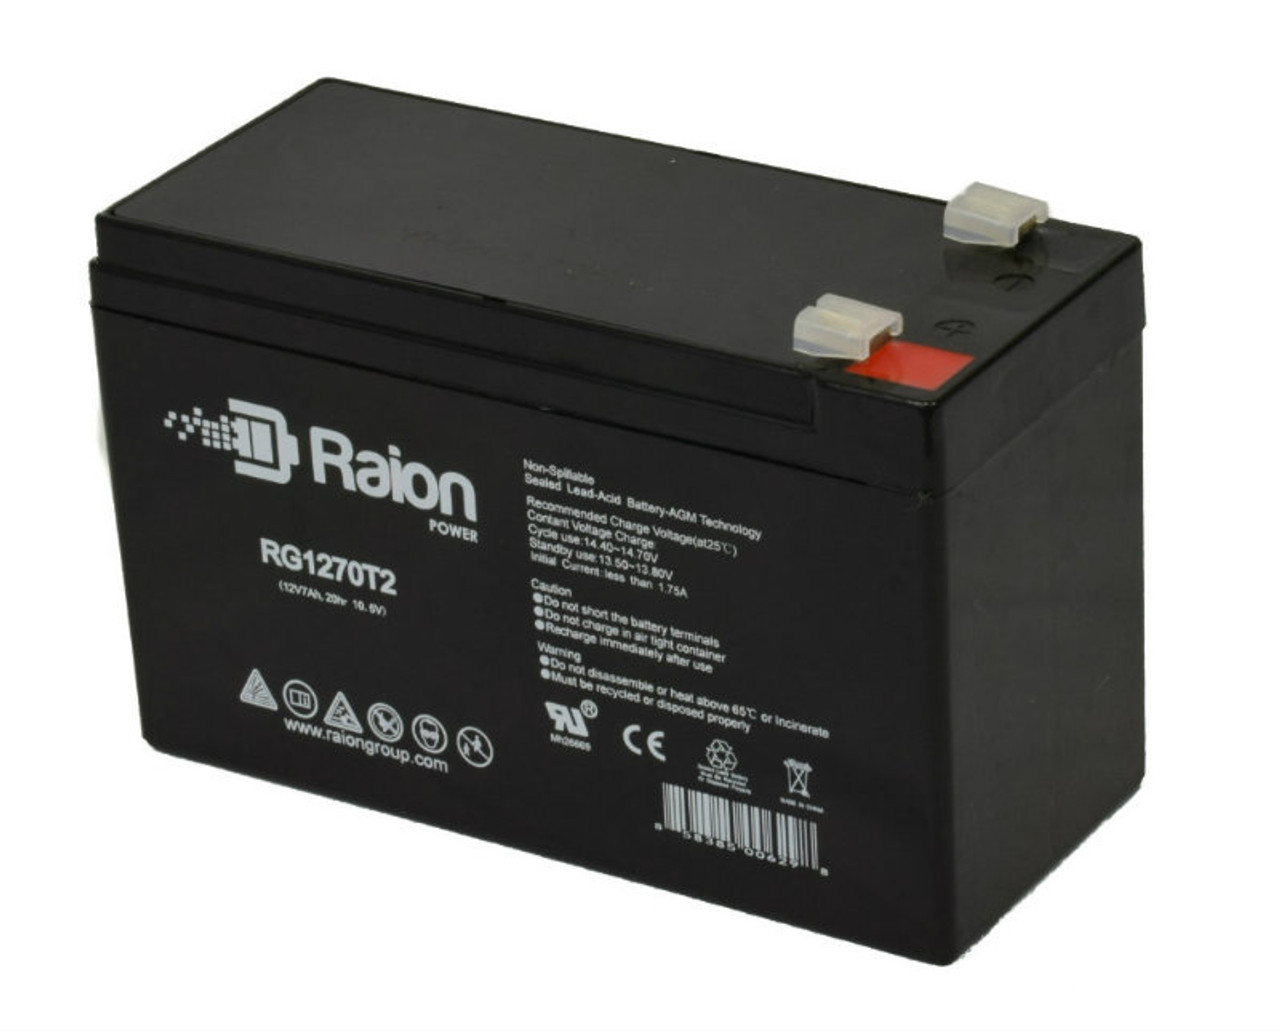 Raion Power RG1270T1 12V 7Ah Non-Spillable Replacement Battery for Leoch LP12-7.0 F1